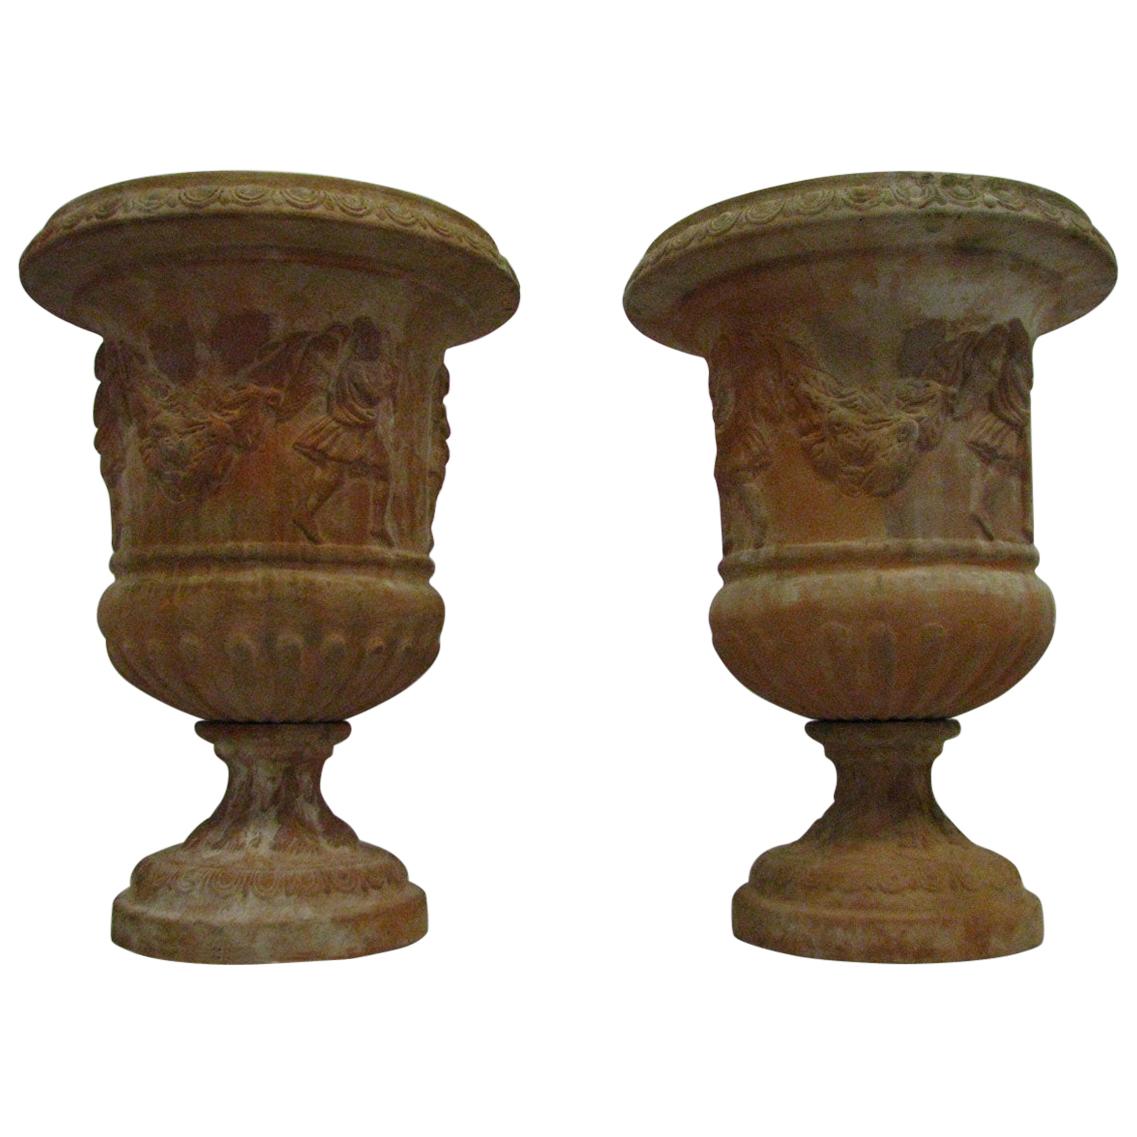 Pair of Classic Garden Vases 'Jardinières' Fired Clay, 20th Century For Sale